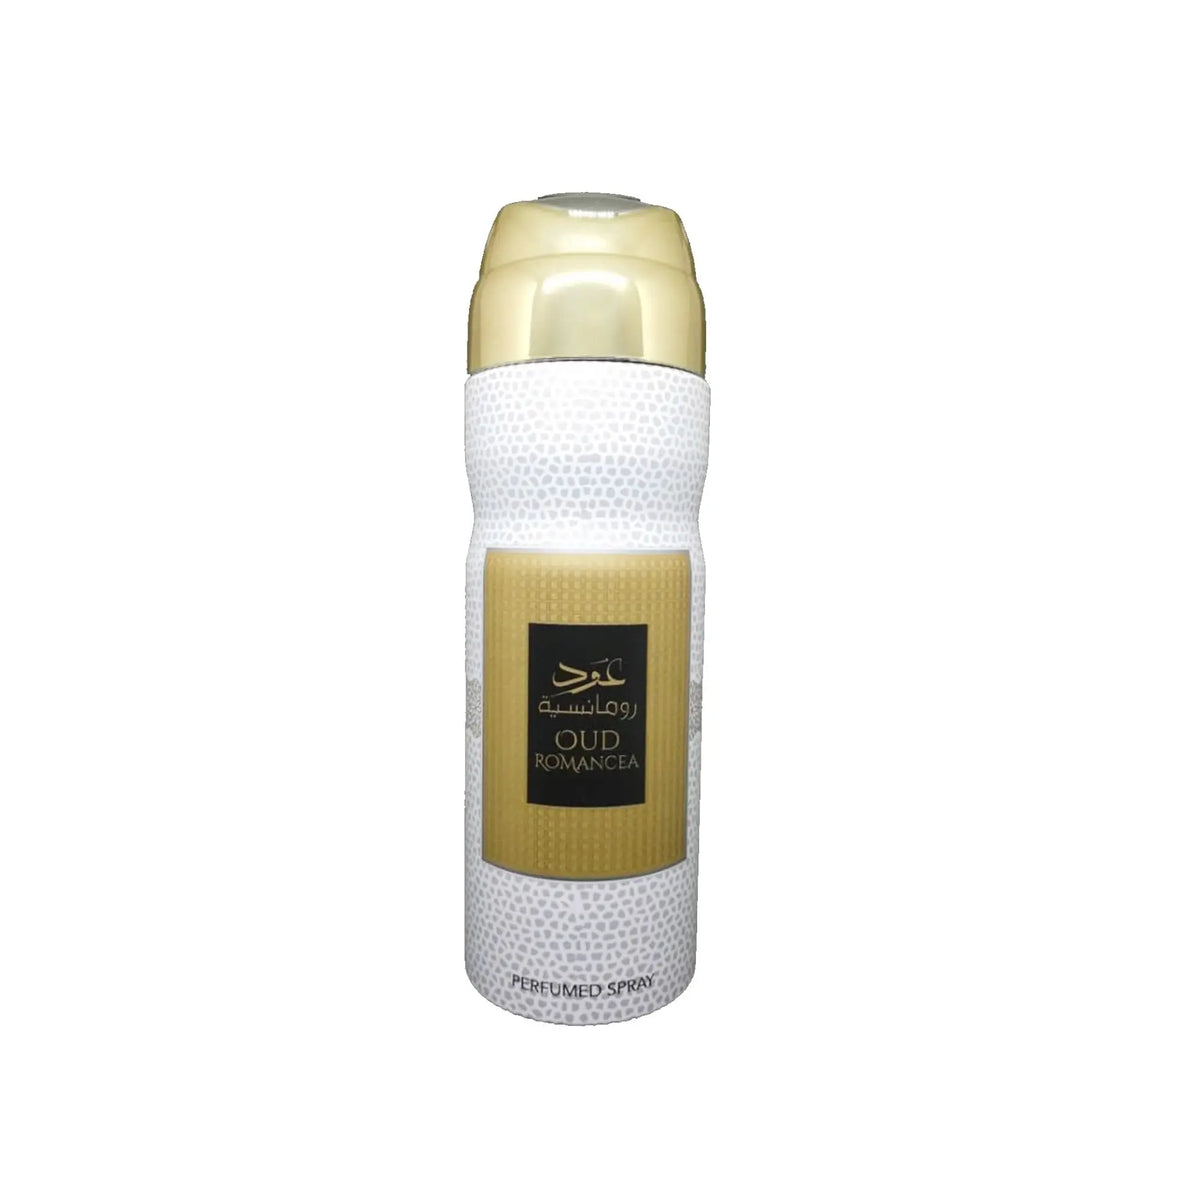 The image shows a cylindrical bottle of "OUD ROMANCEA" perfumed spray. The bottle has a white textured body with a beige label featuring the product name in both Arabic and English in black letters set against a gold background. The cap of the bottle is a smooth, shiny gold, giving a luxurious feel to the product. Below the label, the words "PERFUMED SPRAY" are printed in small, black letters.